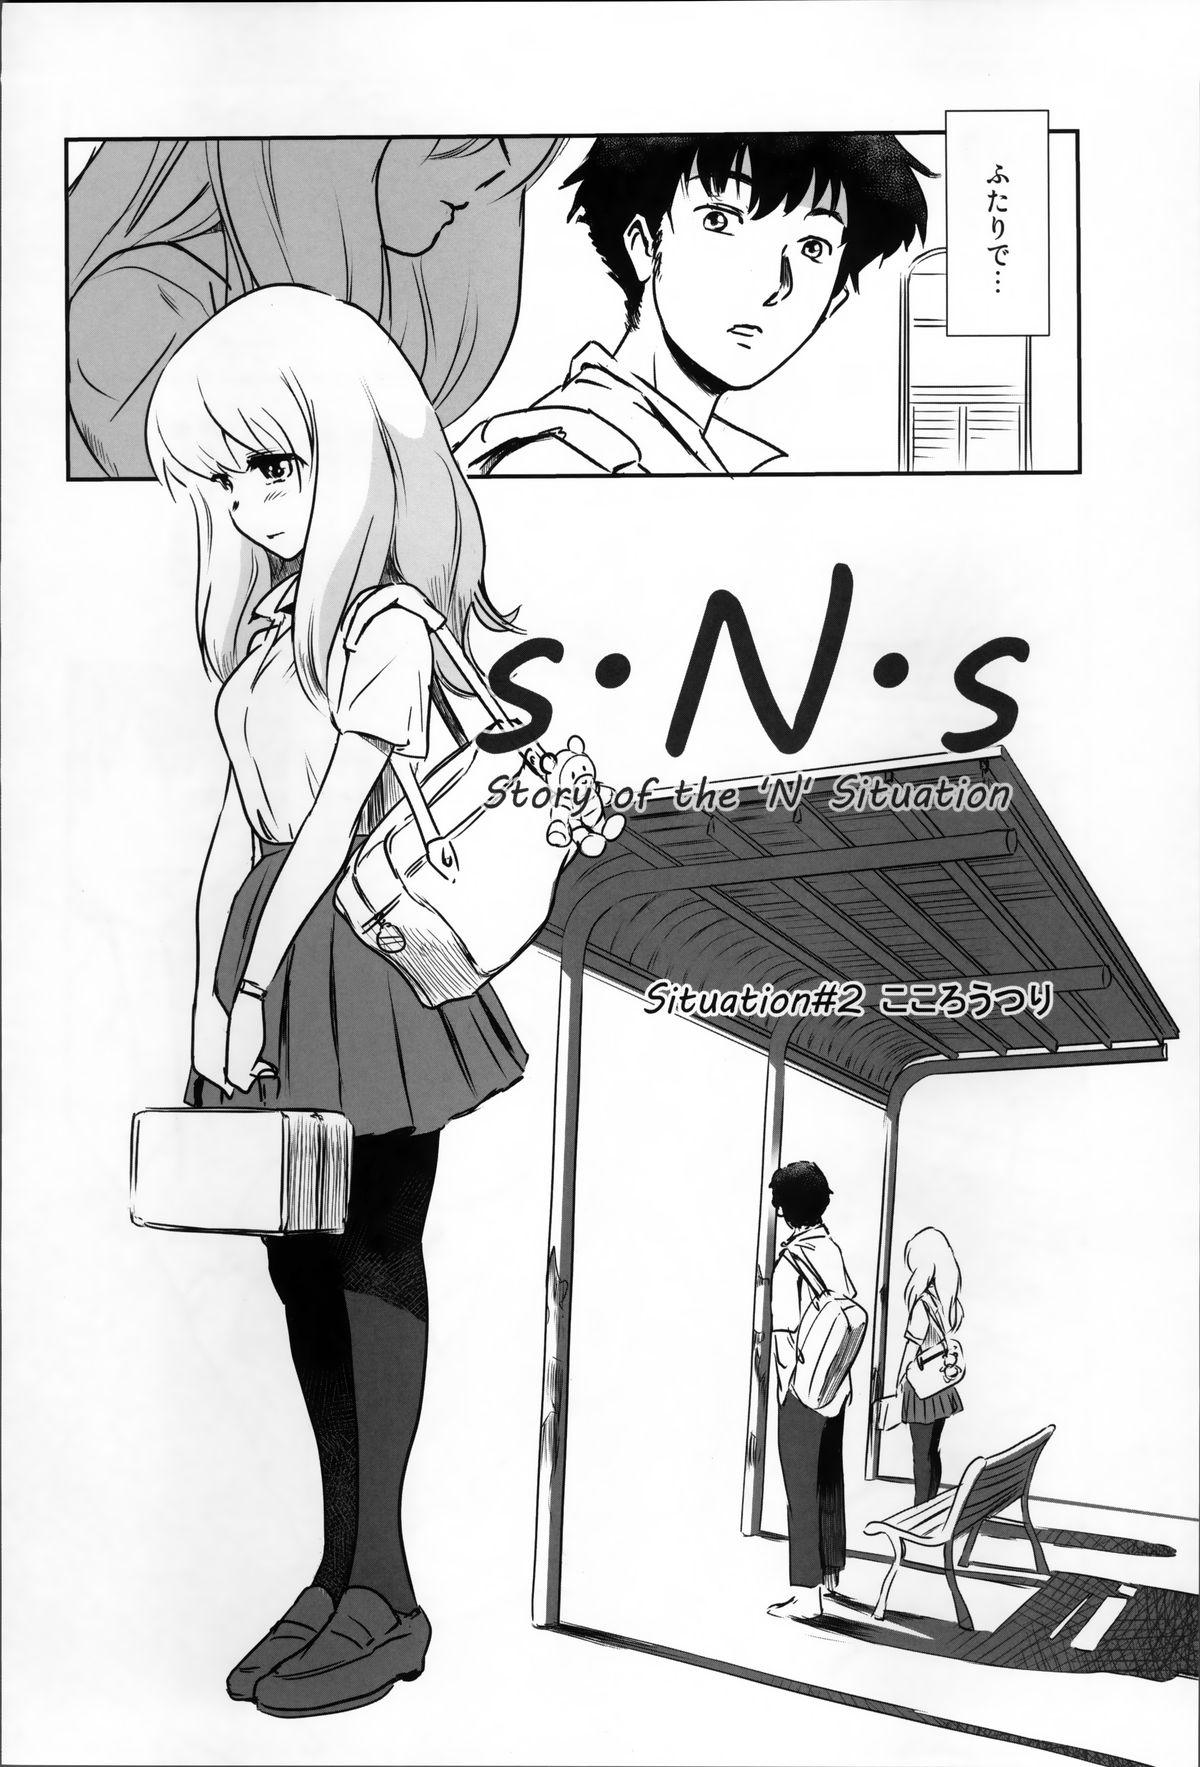 Candid Story of the 'N' Situation - Situation#2 Kokoro Utsuri Asian - Page 4